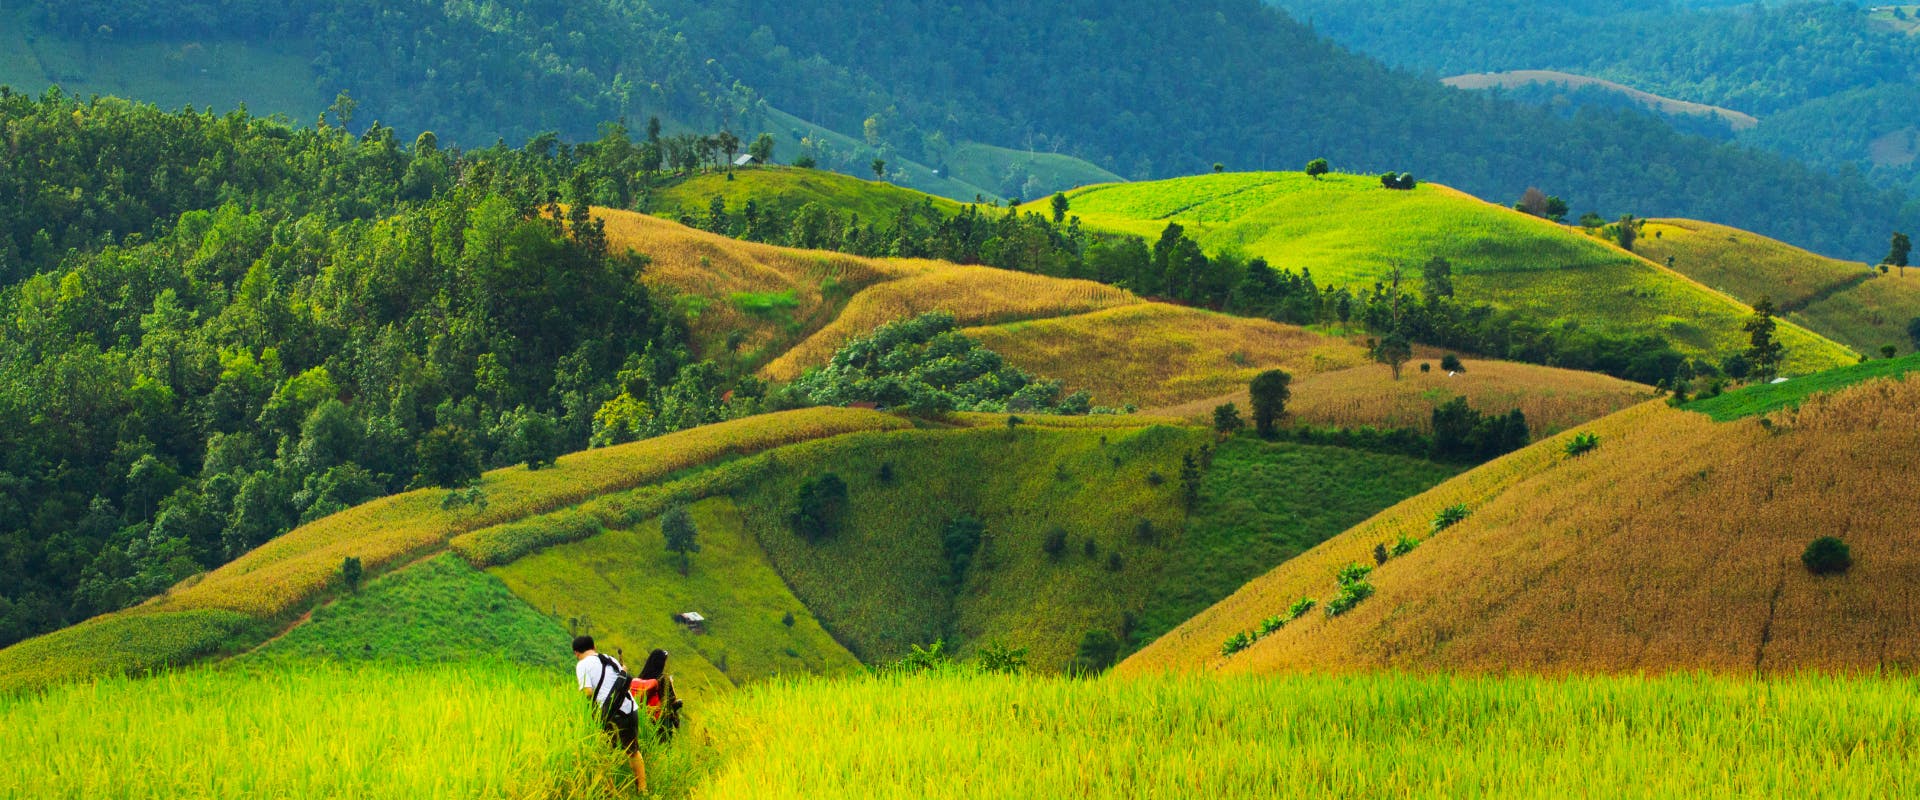 a couple walking through a grass field in a the valley of a rural area